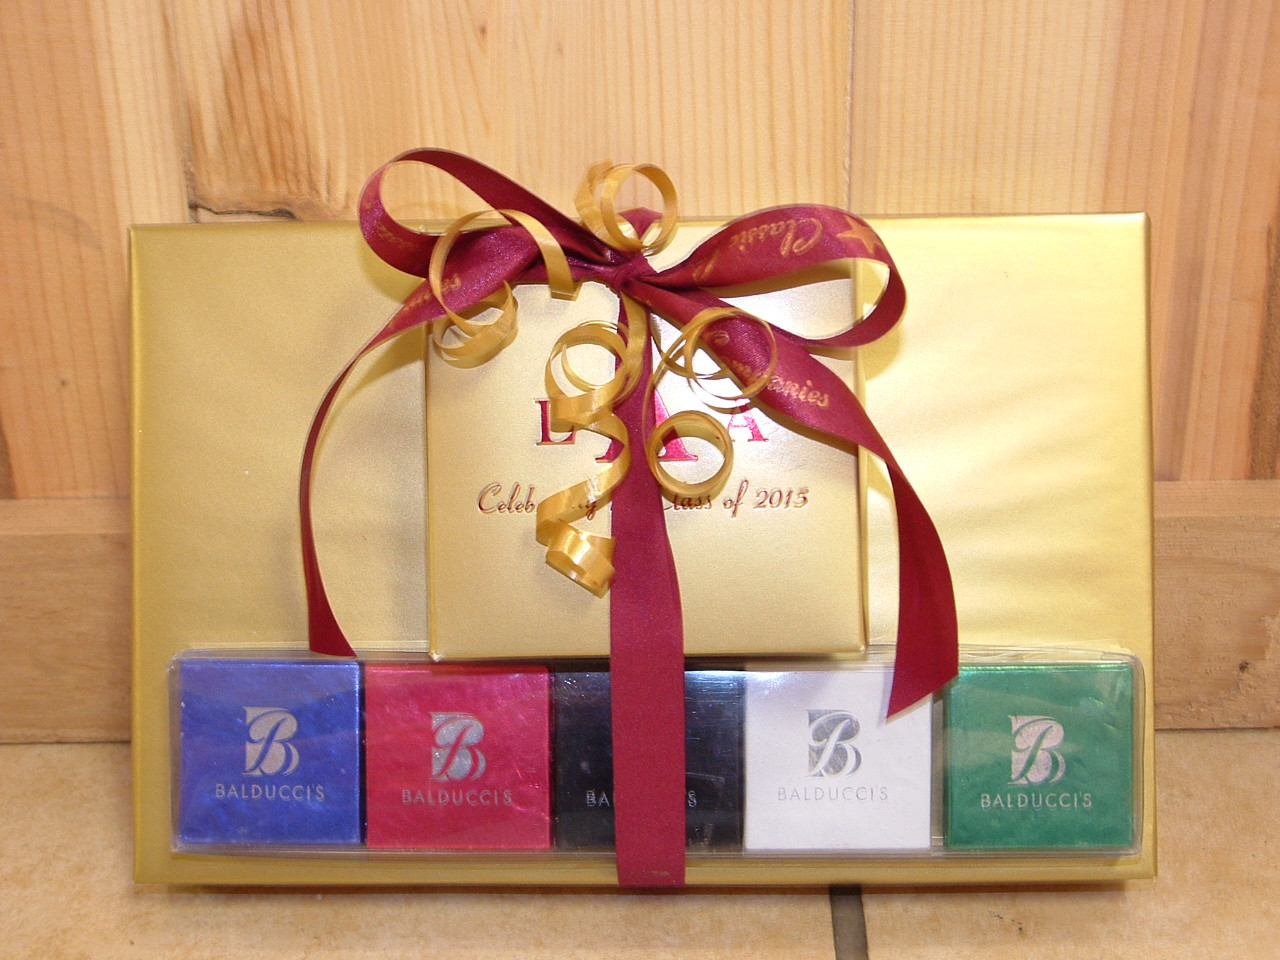 Business Holiday Gift Ideas
 Great Corporate Holiday Gift Ideas of Chocolate and or